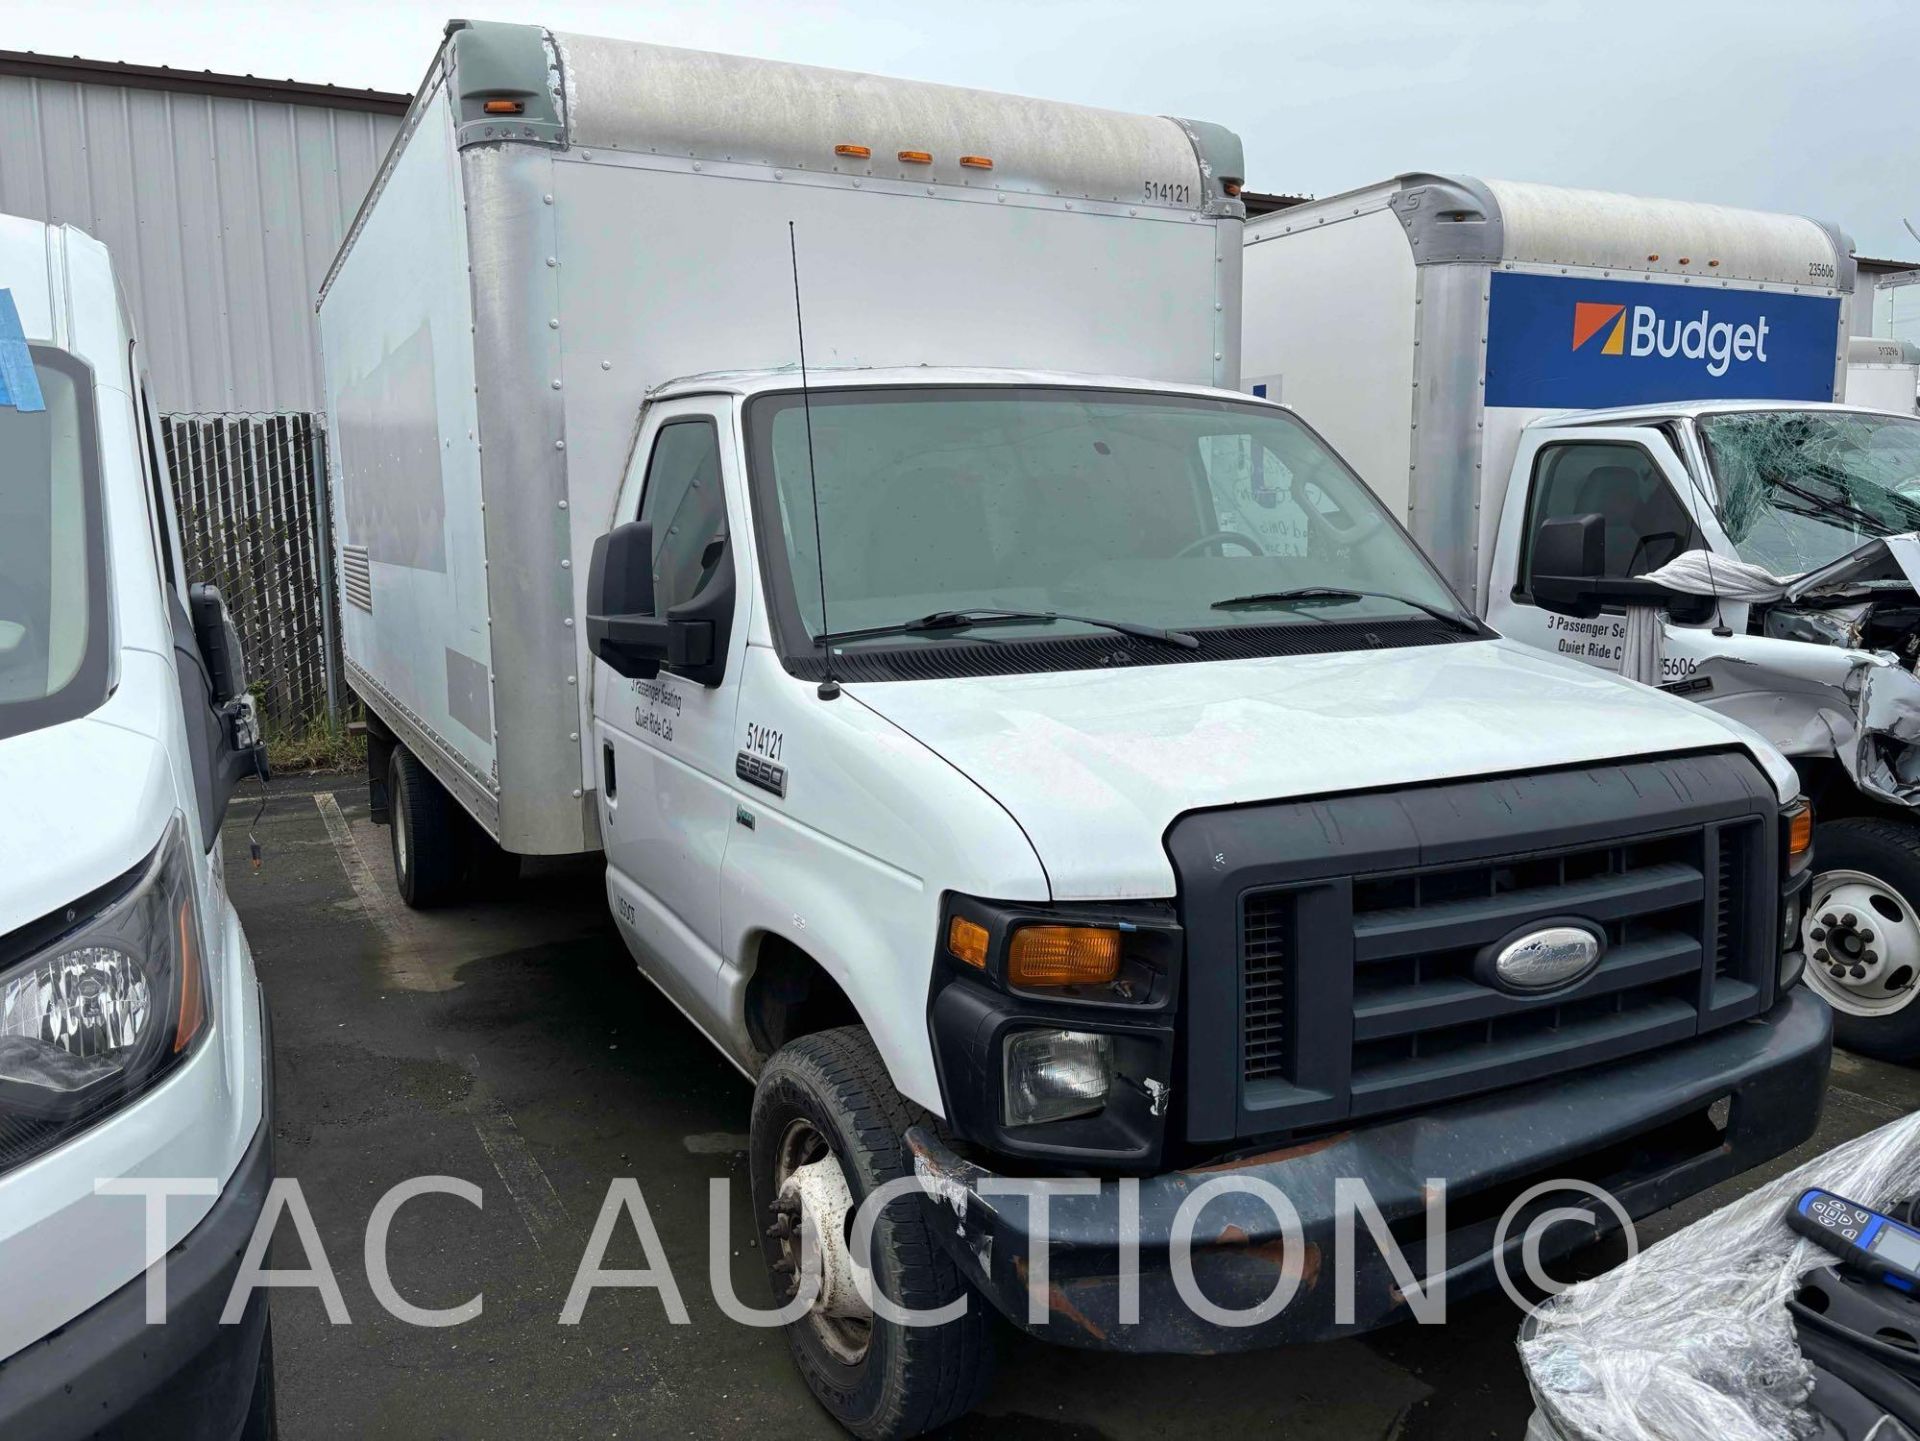 2015 Ford E-350 16ft Box Truck - Image 24 of 98